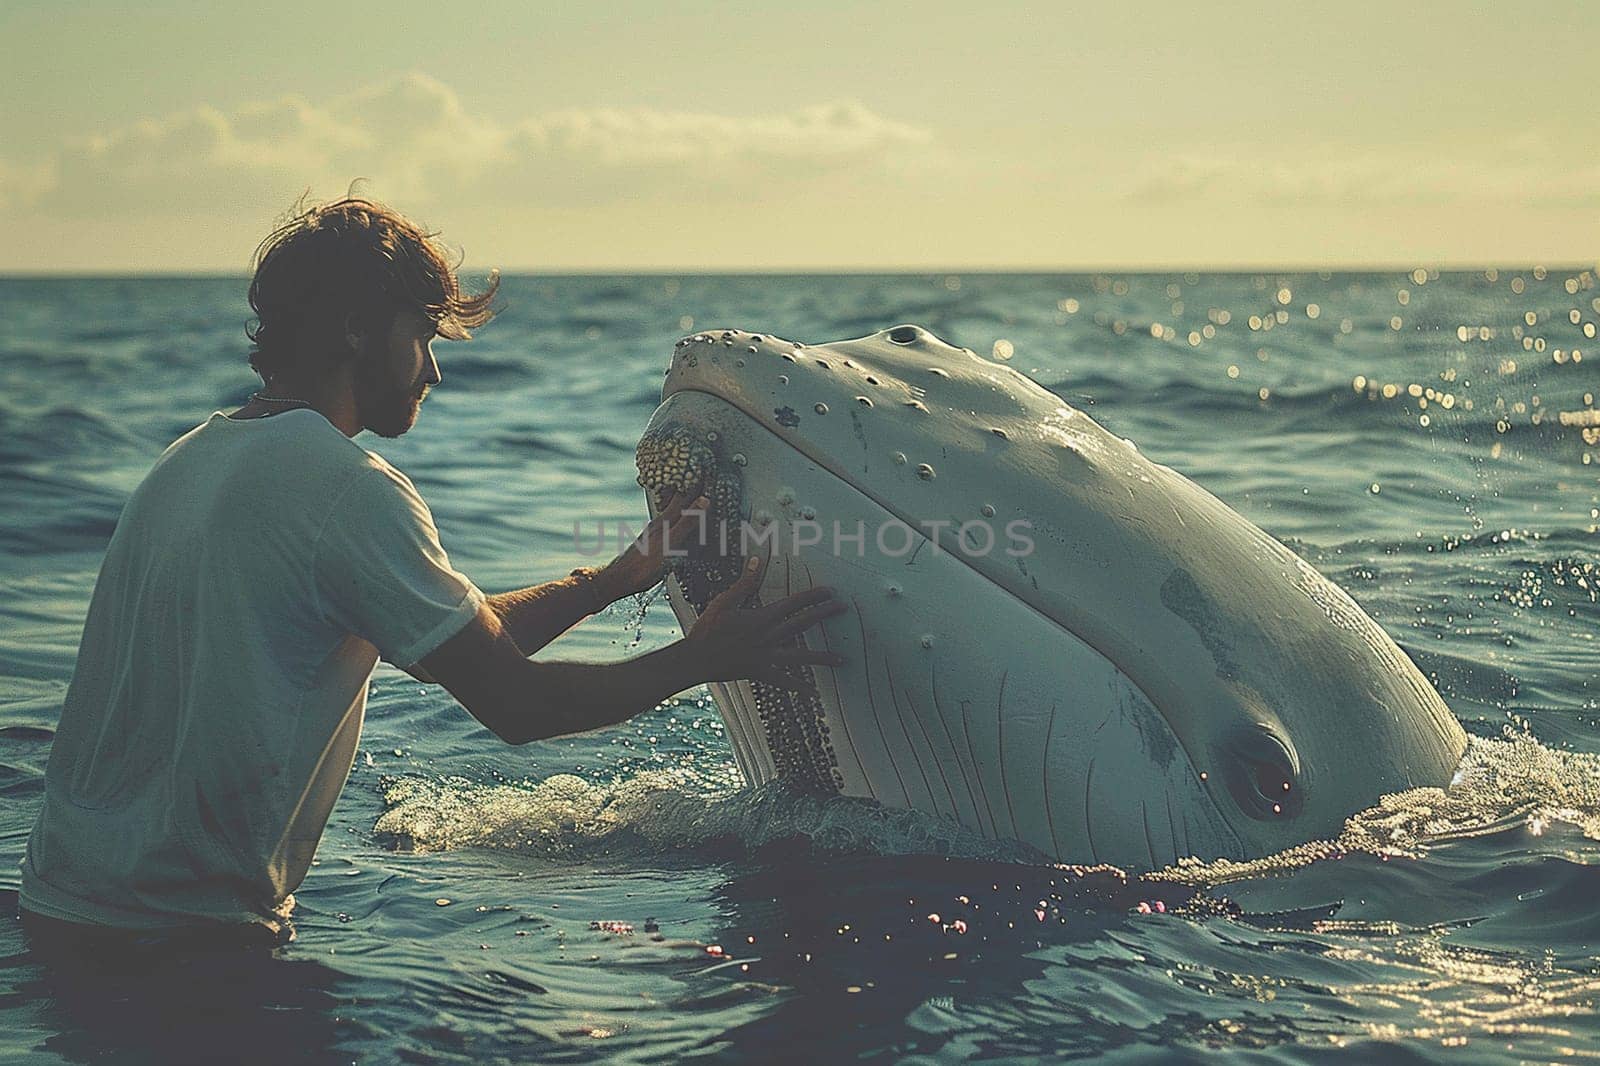 Man and whale. Whale protection concept.